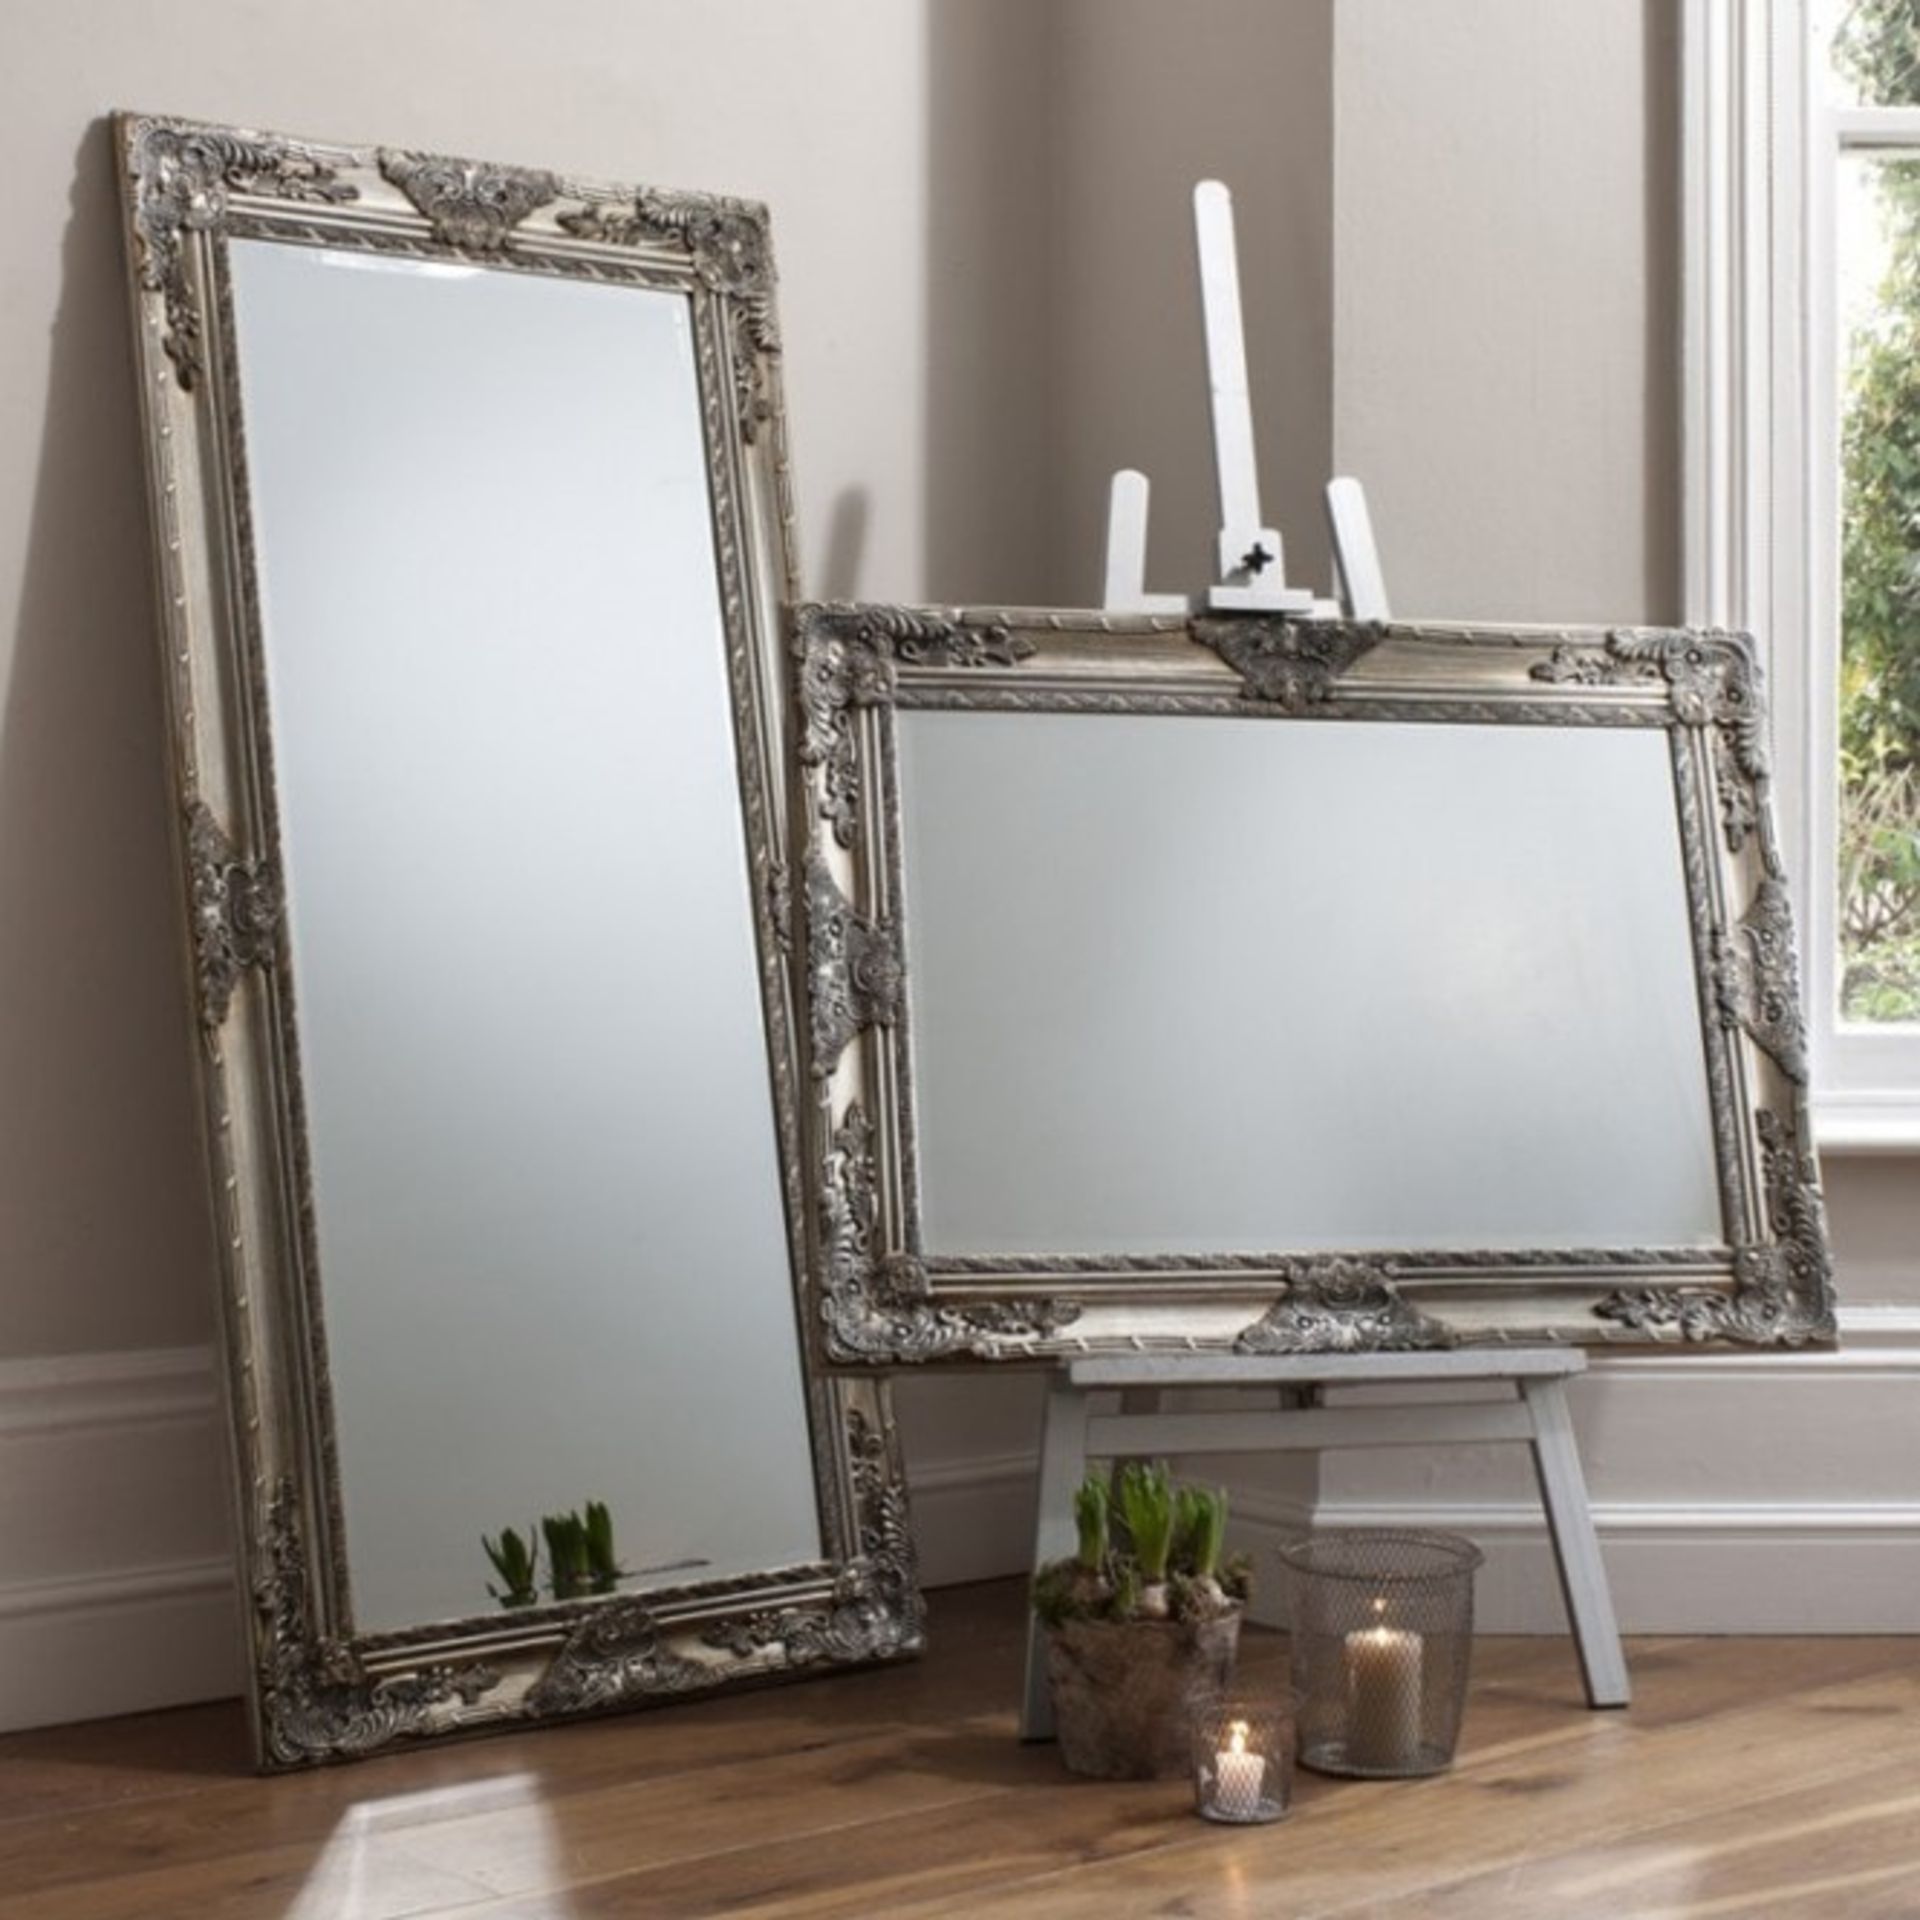 Hampshire Leaner Mirror Silver Beautifully Decorative Wood Framed Full Length Mirror In A Hand